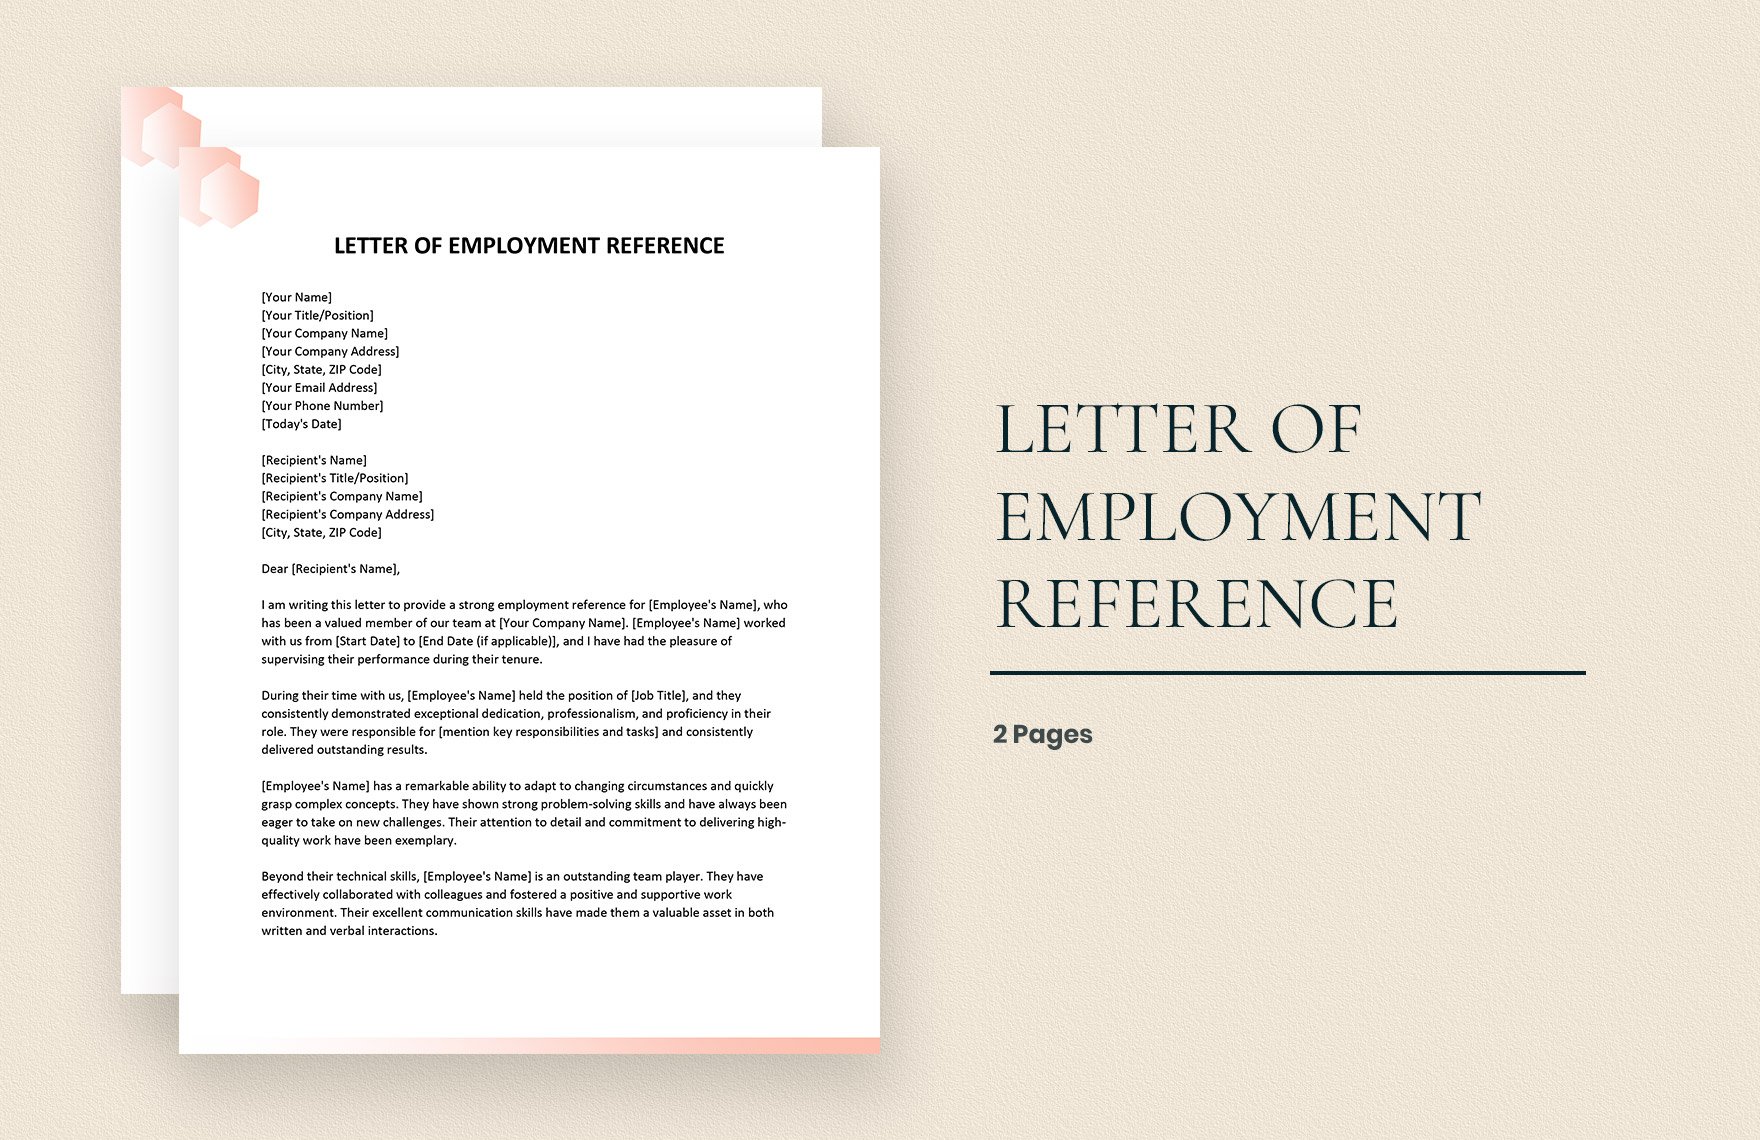 Letter of Employment Reference